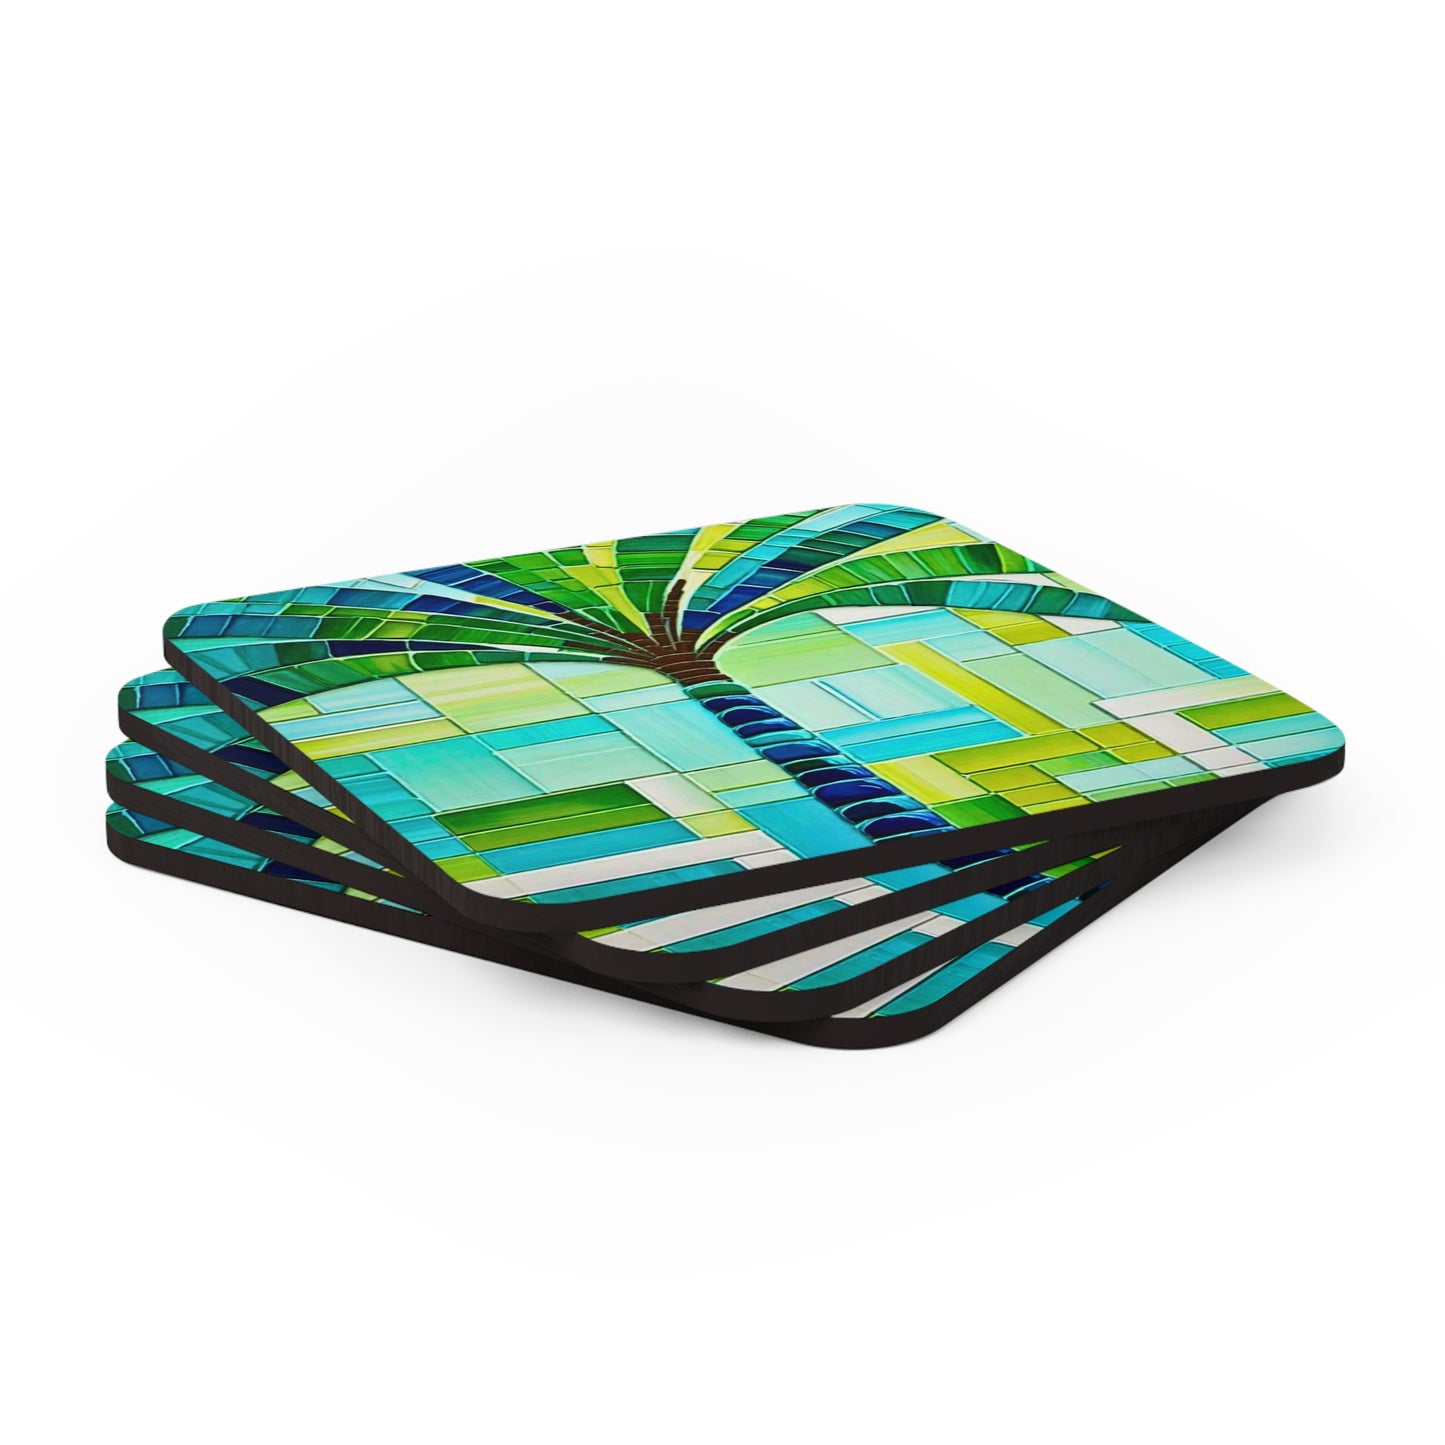 Turks and Caicos Island Palm Tree Mosaic Cocktail Beverage Entertaining  Outdoor Patio Corkwood Coaster Set